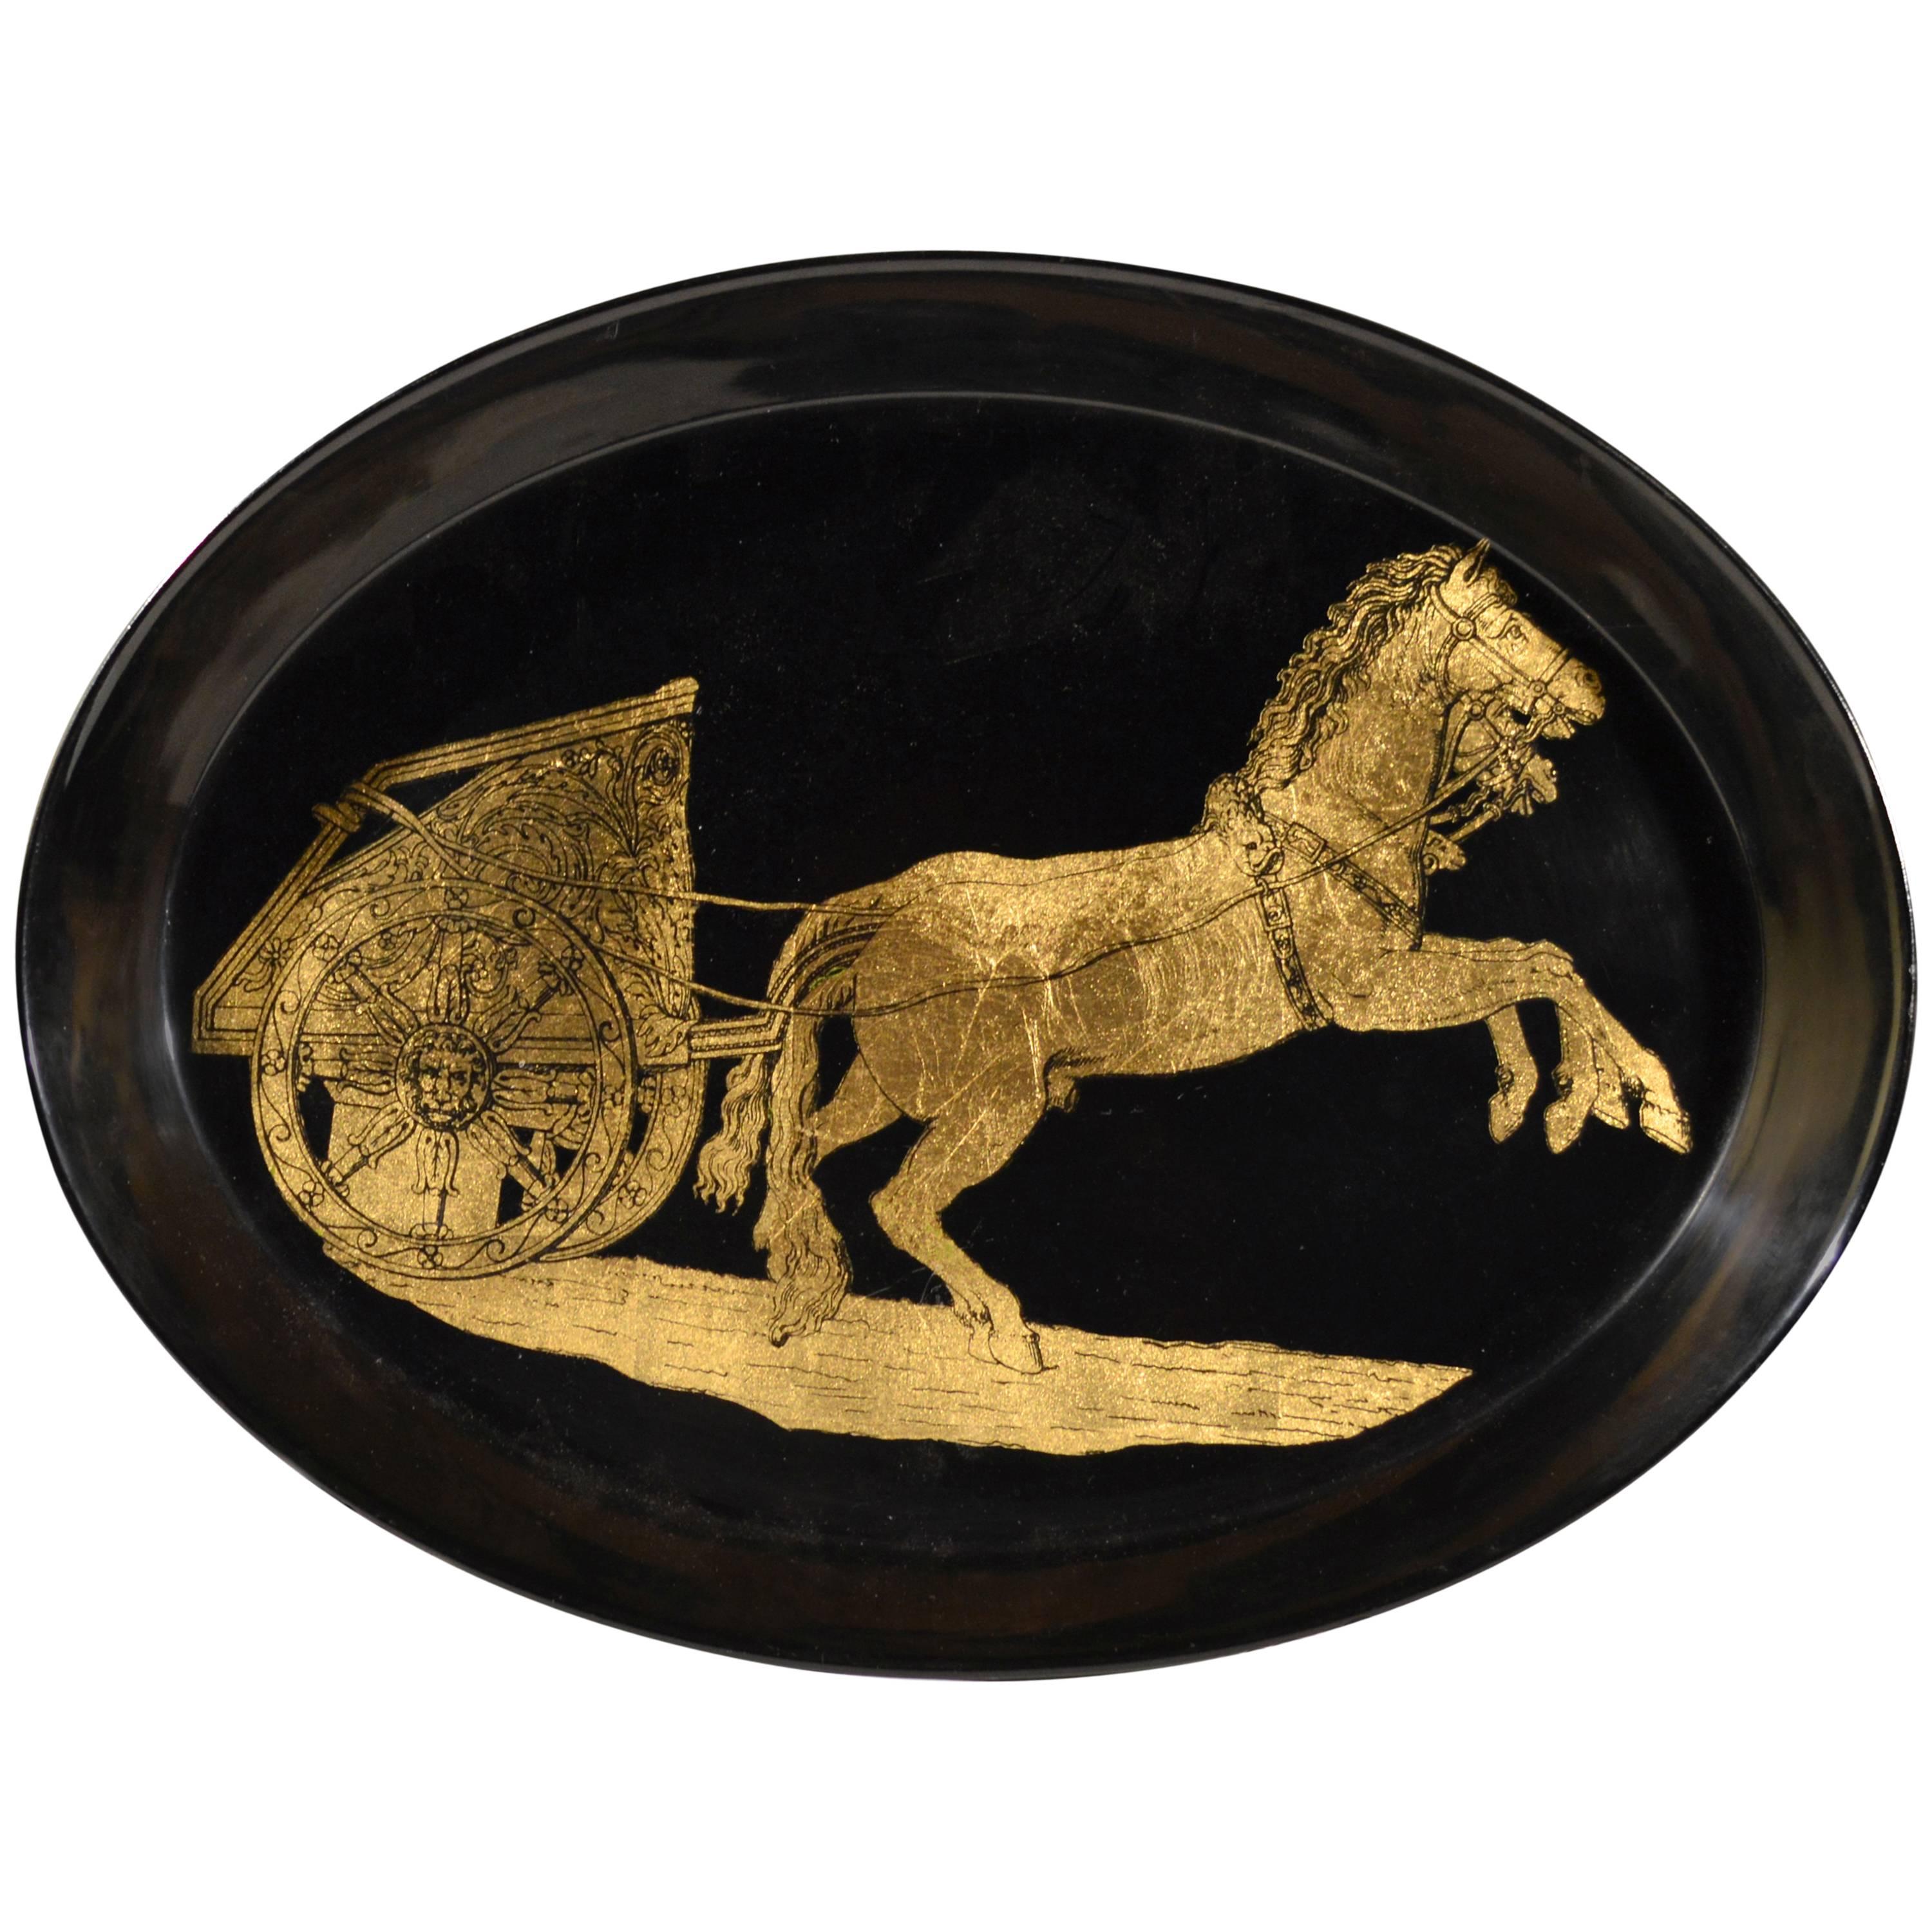 Piero Fornasetti Black and Gold Neoclassical Metal Tray with Horse and Chariot